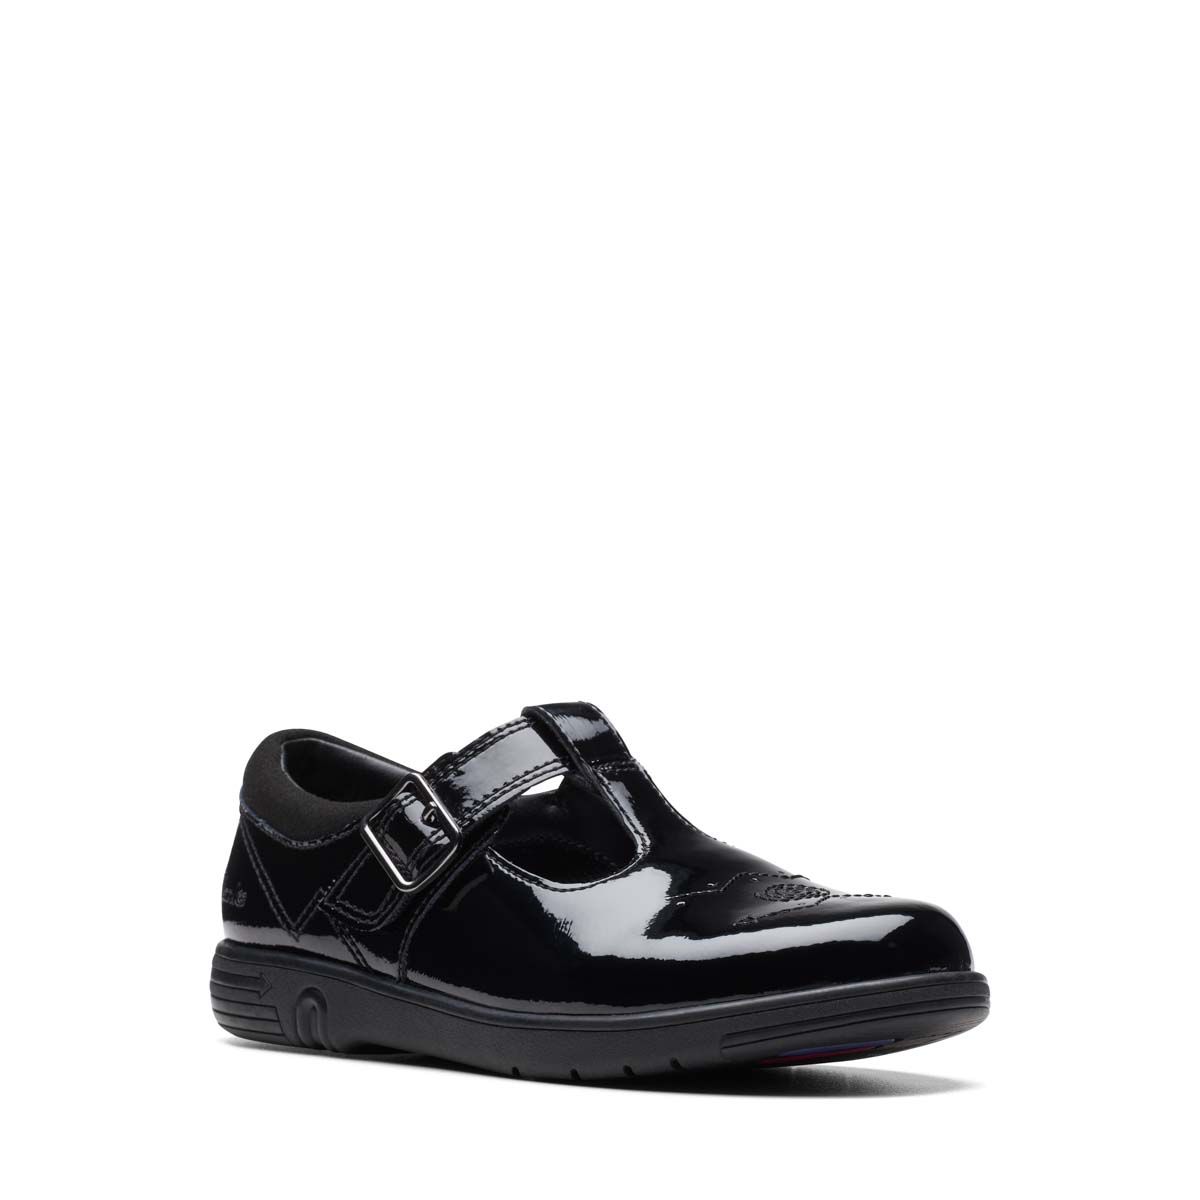 Clarks Jazzy Tap T Bar Black Patent Kids Girls School Shoes 753076F In Size 10 In Plain Black Patent F Width Fitting Regular Fit For School For kids